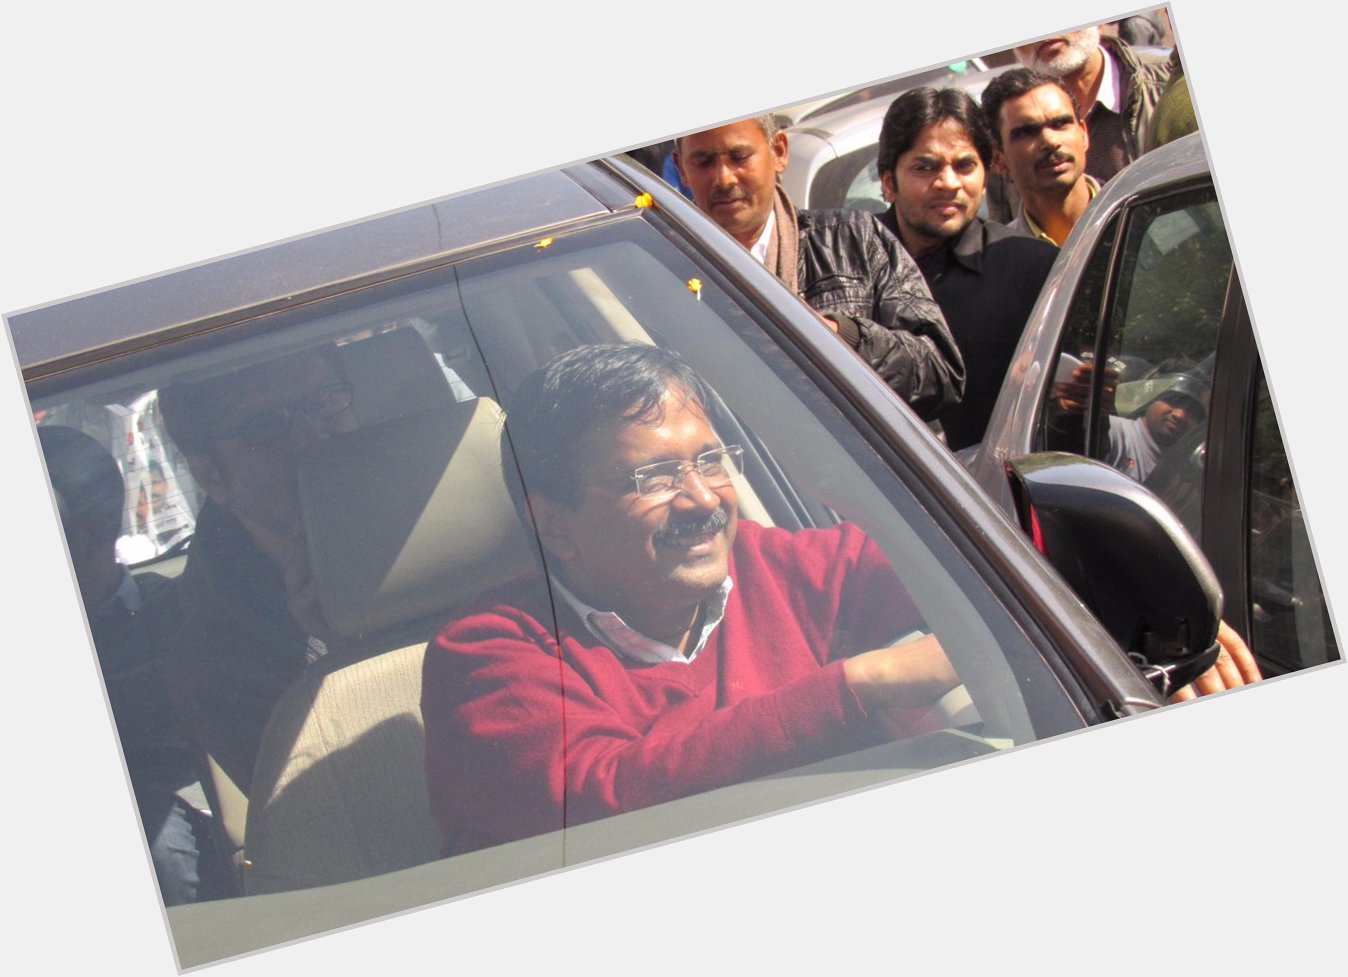 A pic clicked by me while Delhi election, cant forget that day
JANTA KA CM 
Happy Birthday Arvind Kejriwal 